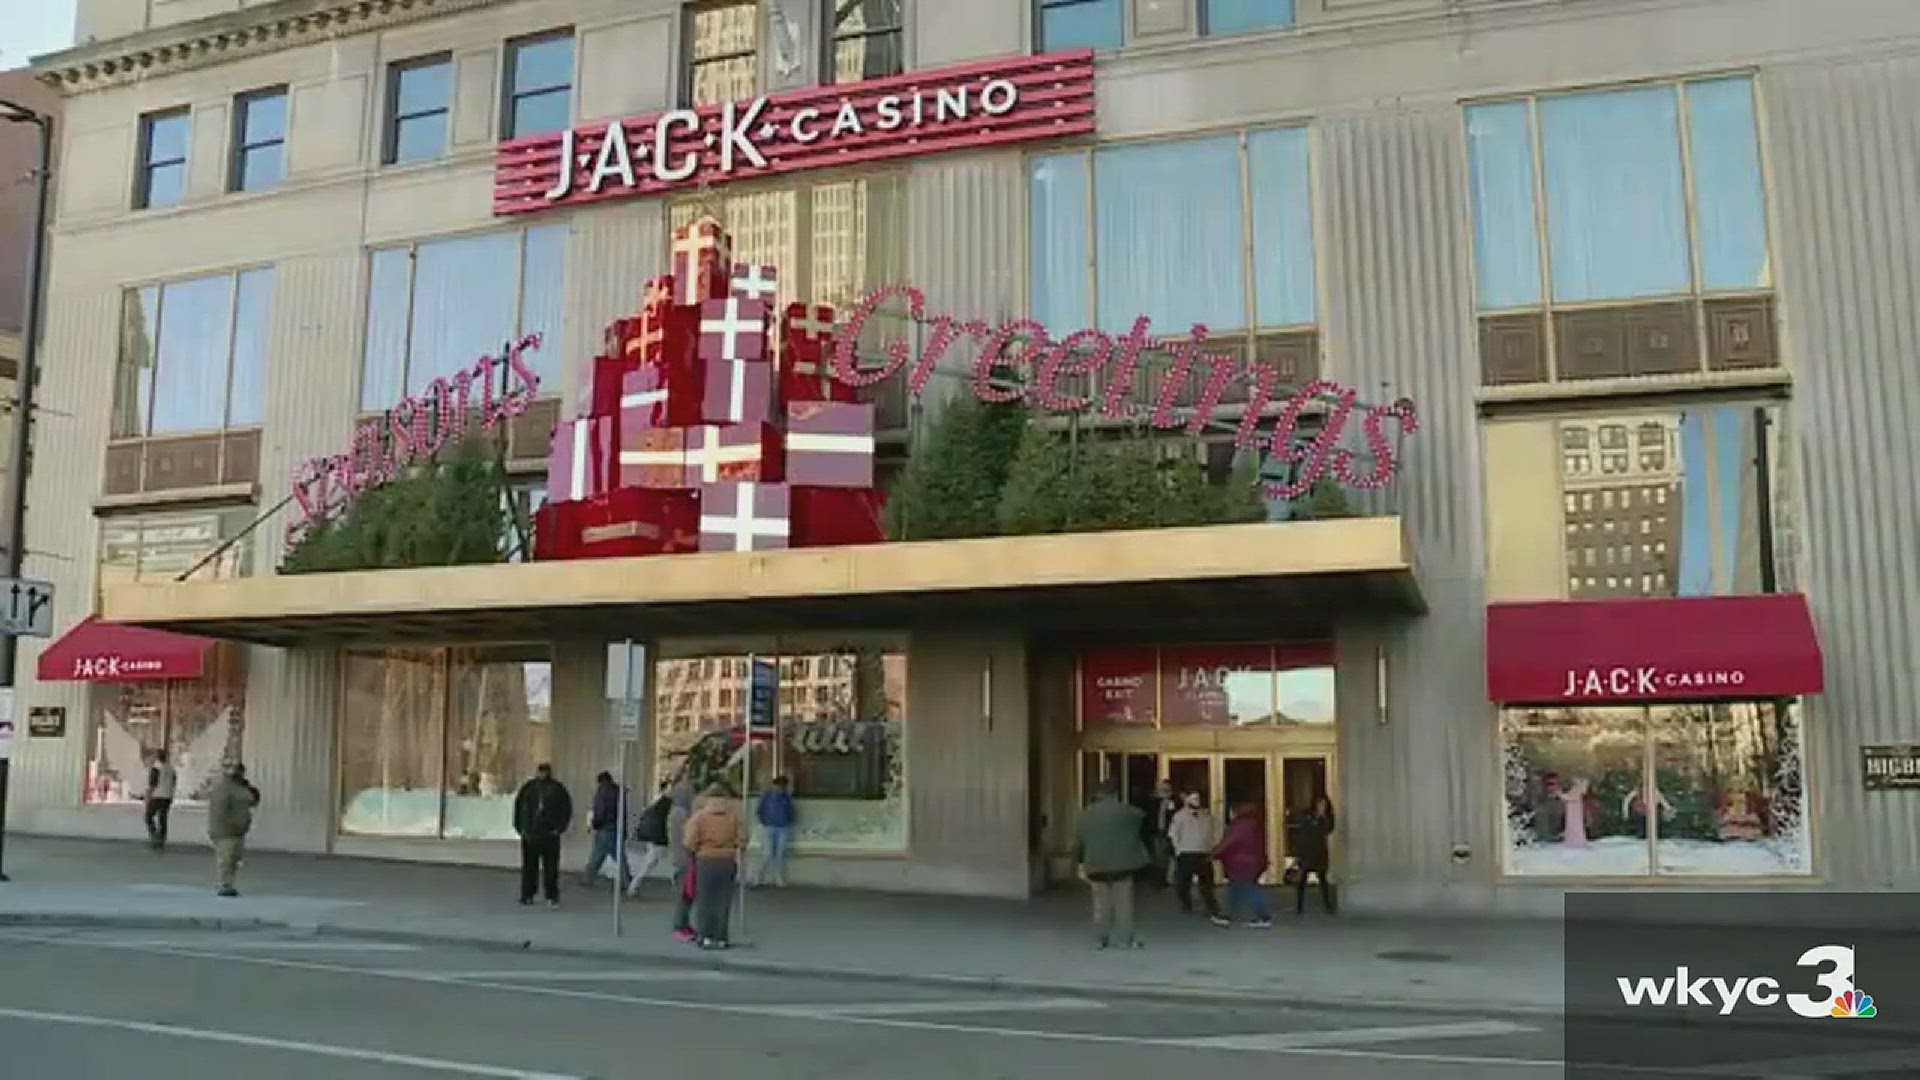 Nov. 29, 2017: The JACK Cleveland Casino is in the holiday spirit. Check out their Christmas decorations for 2017.